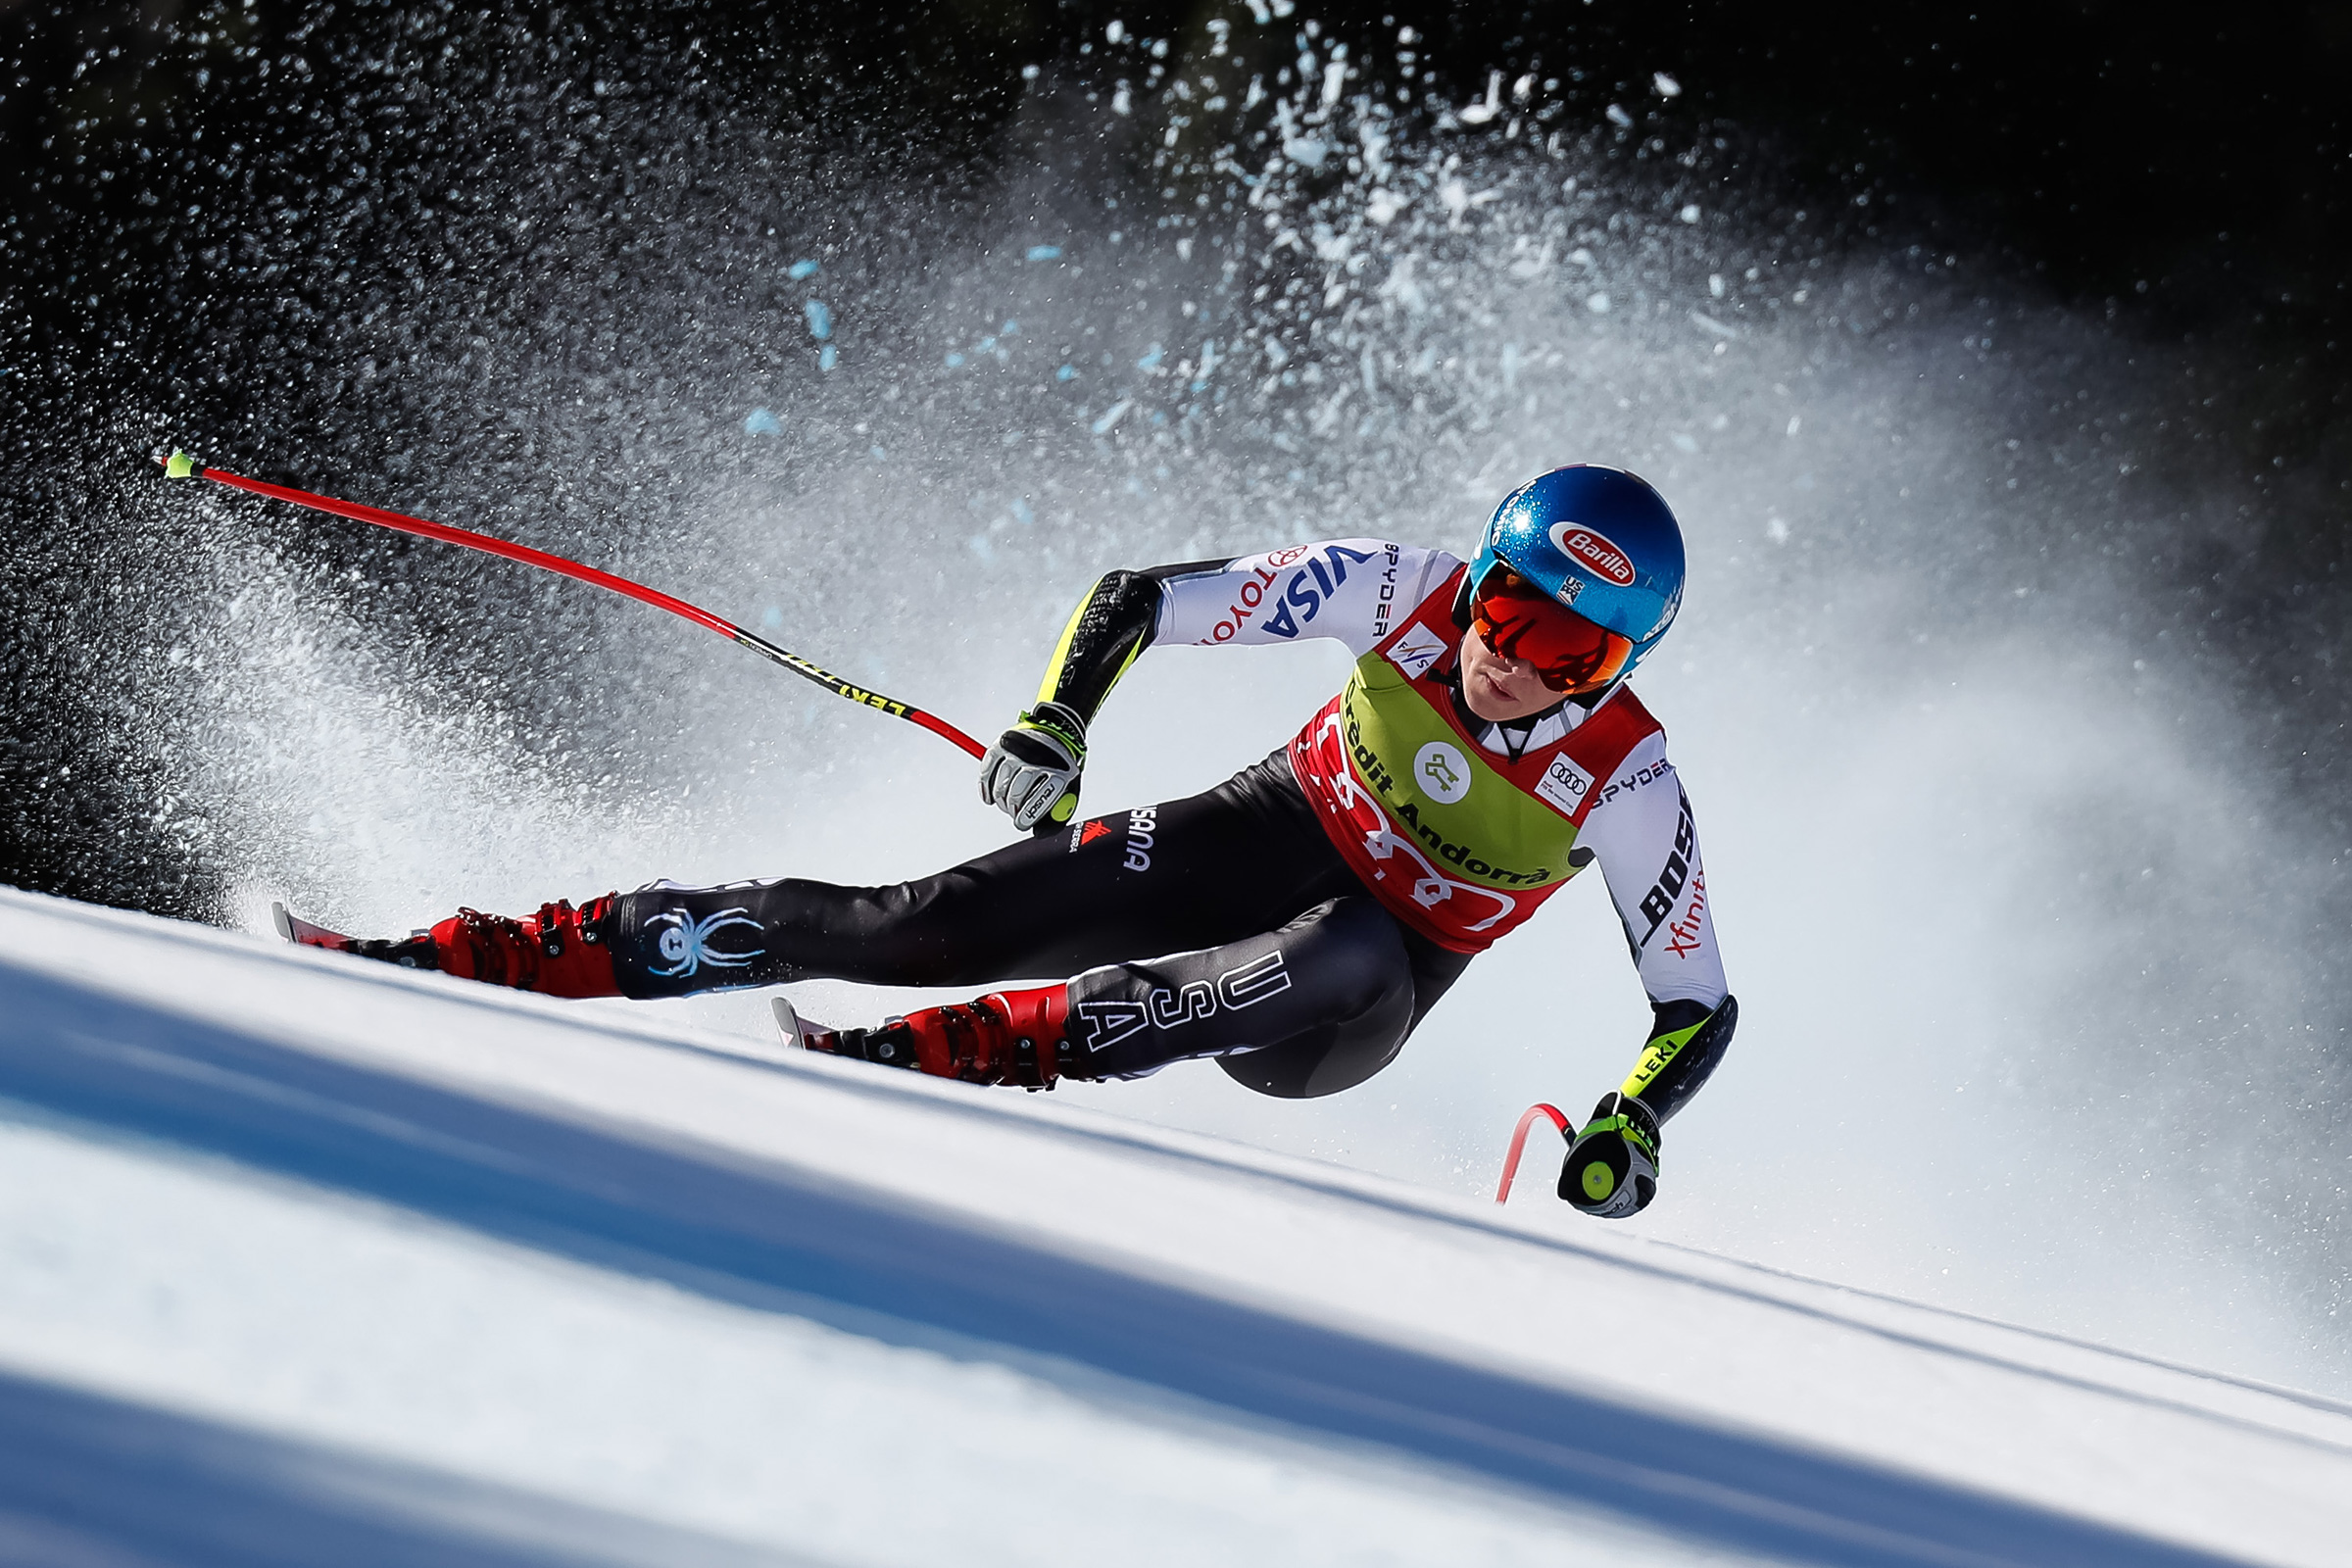 Mikaela Shiffrin of USA competes during the Audi FIS Alpine Ski World Cup Men's and Women's Super G in Soldeu Andorra on March 14, 2019.